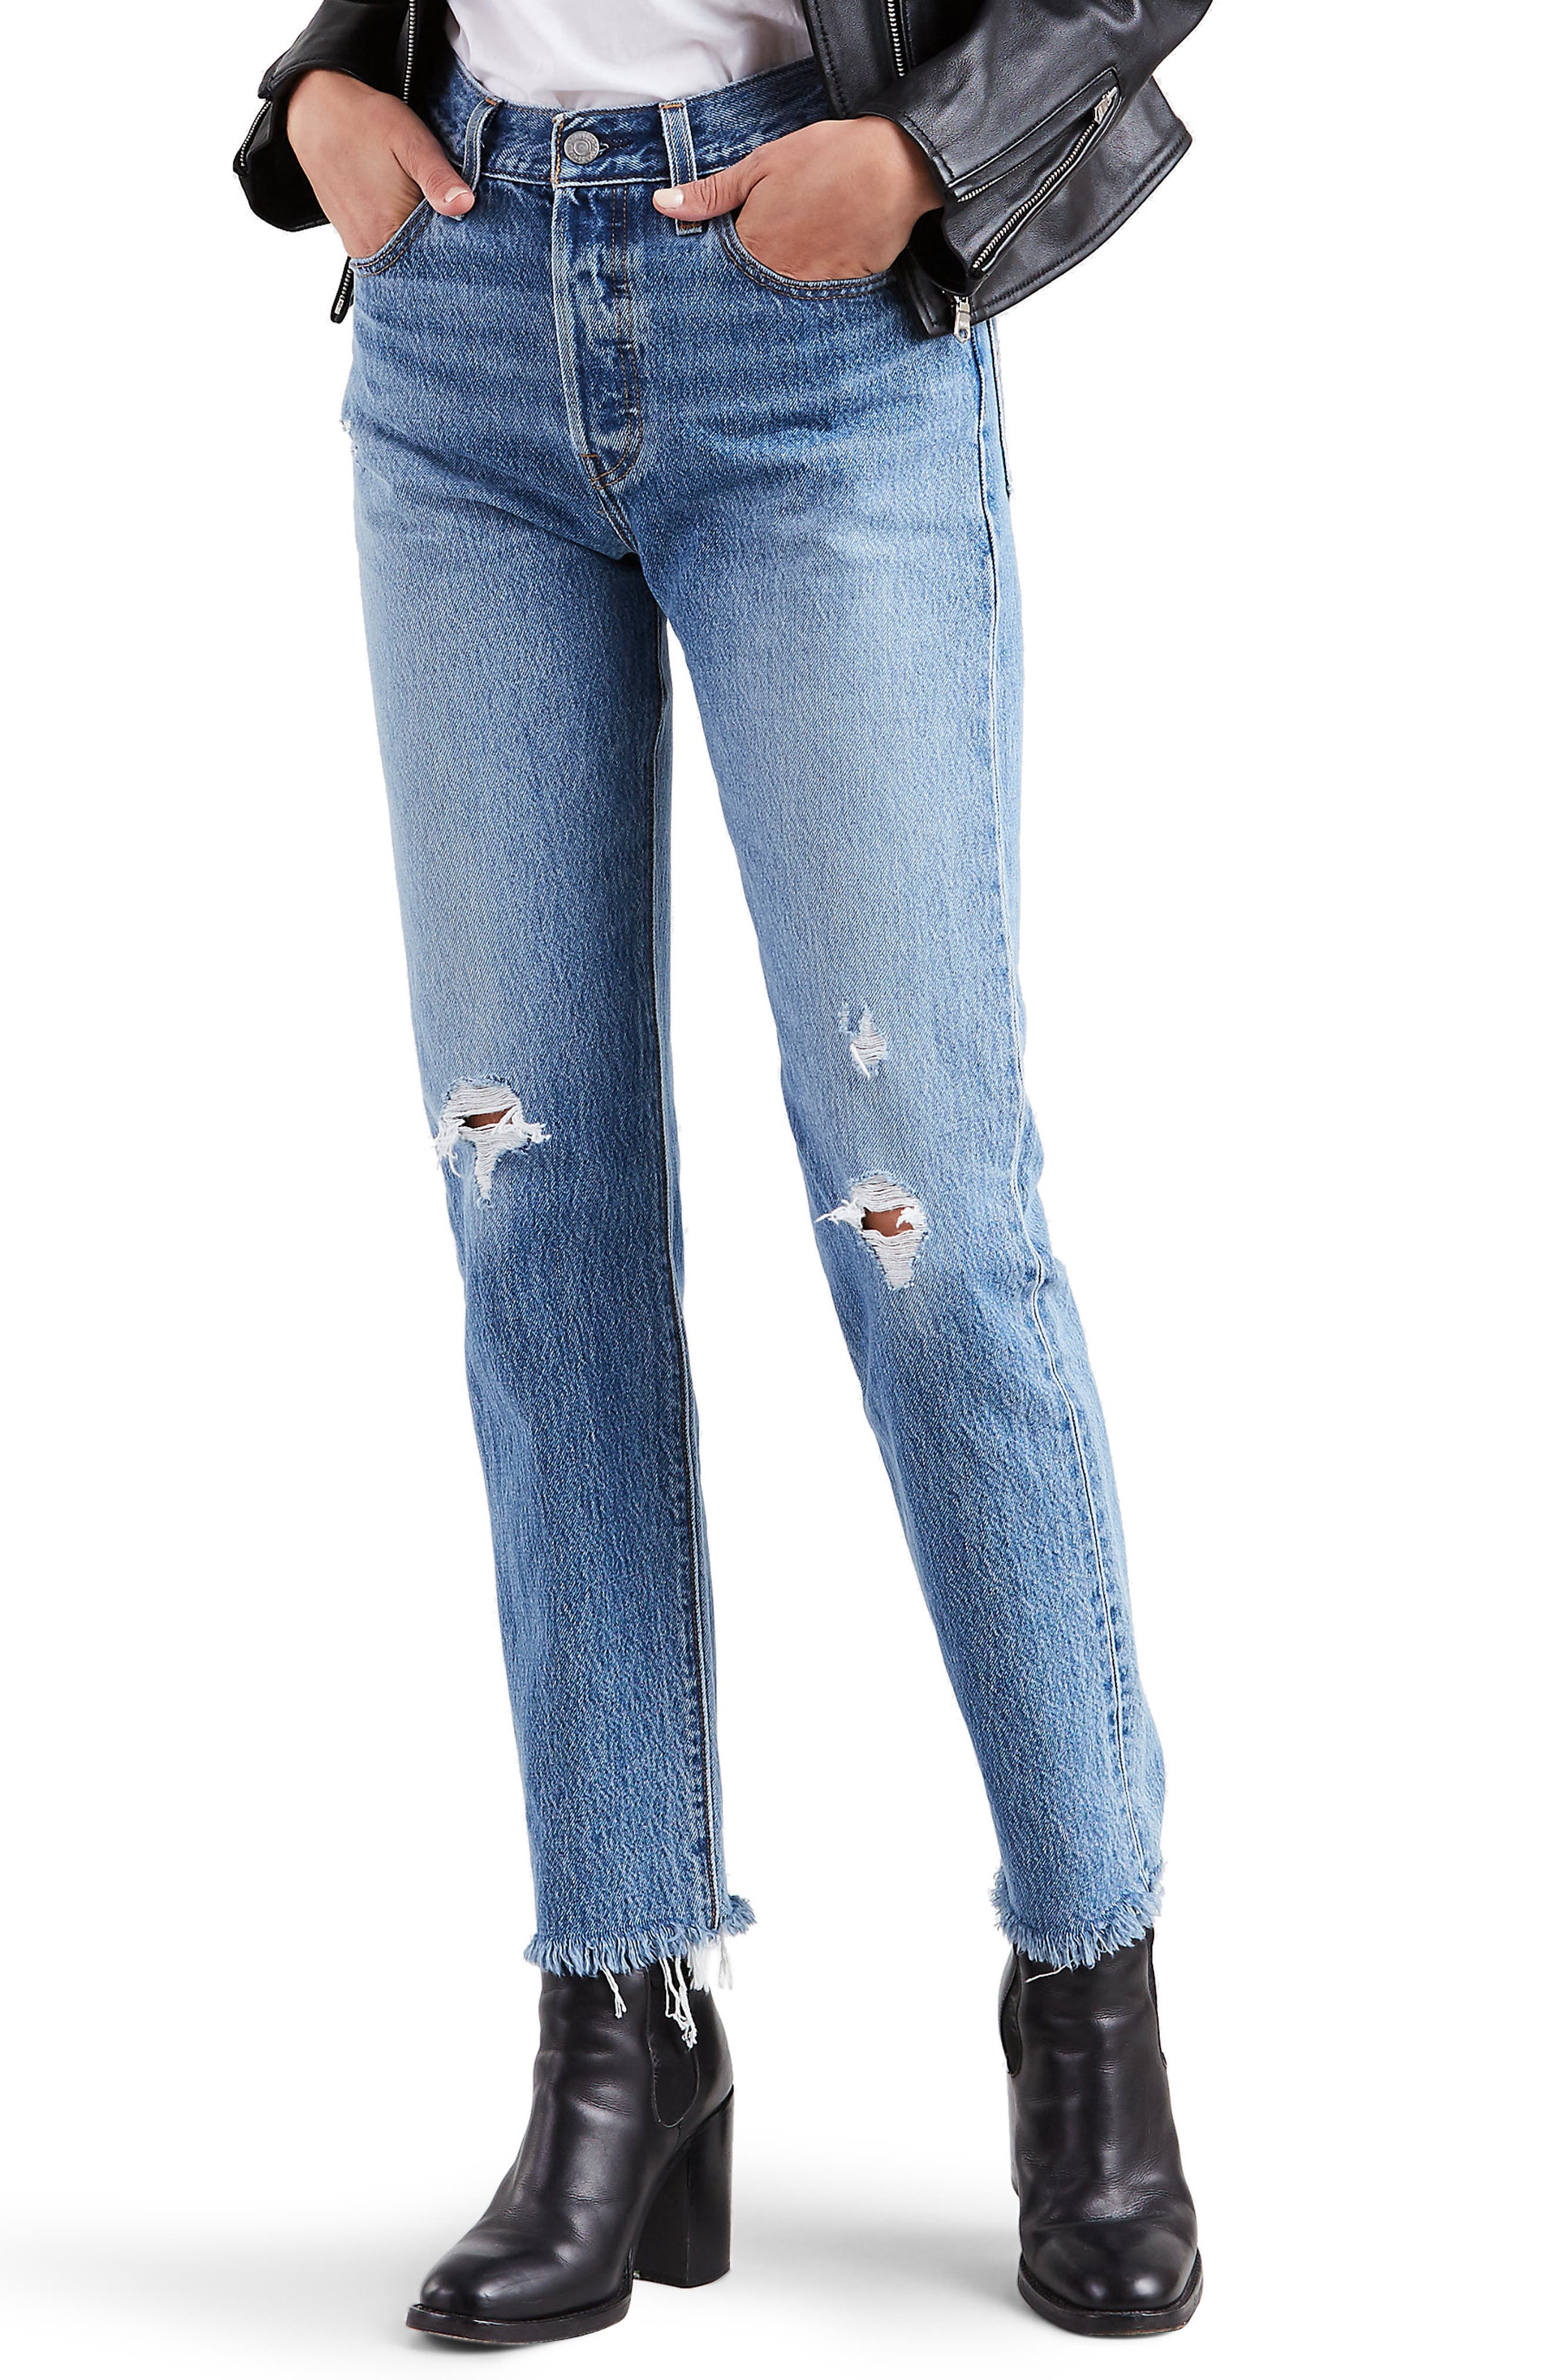 levi's 501 high rise jeans